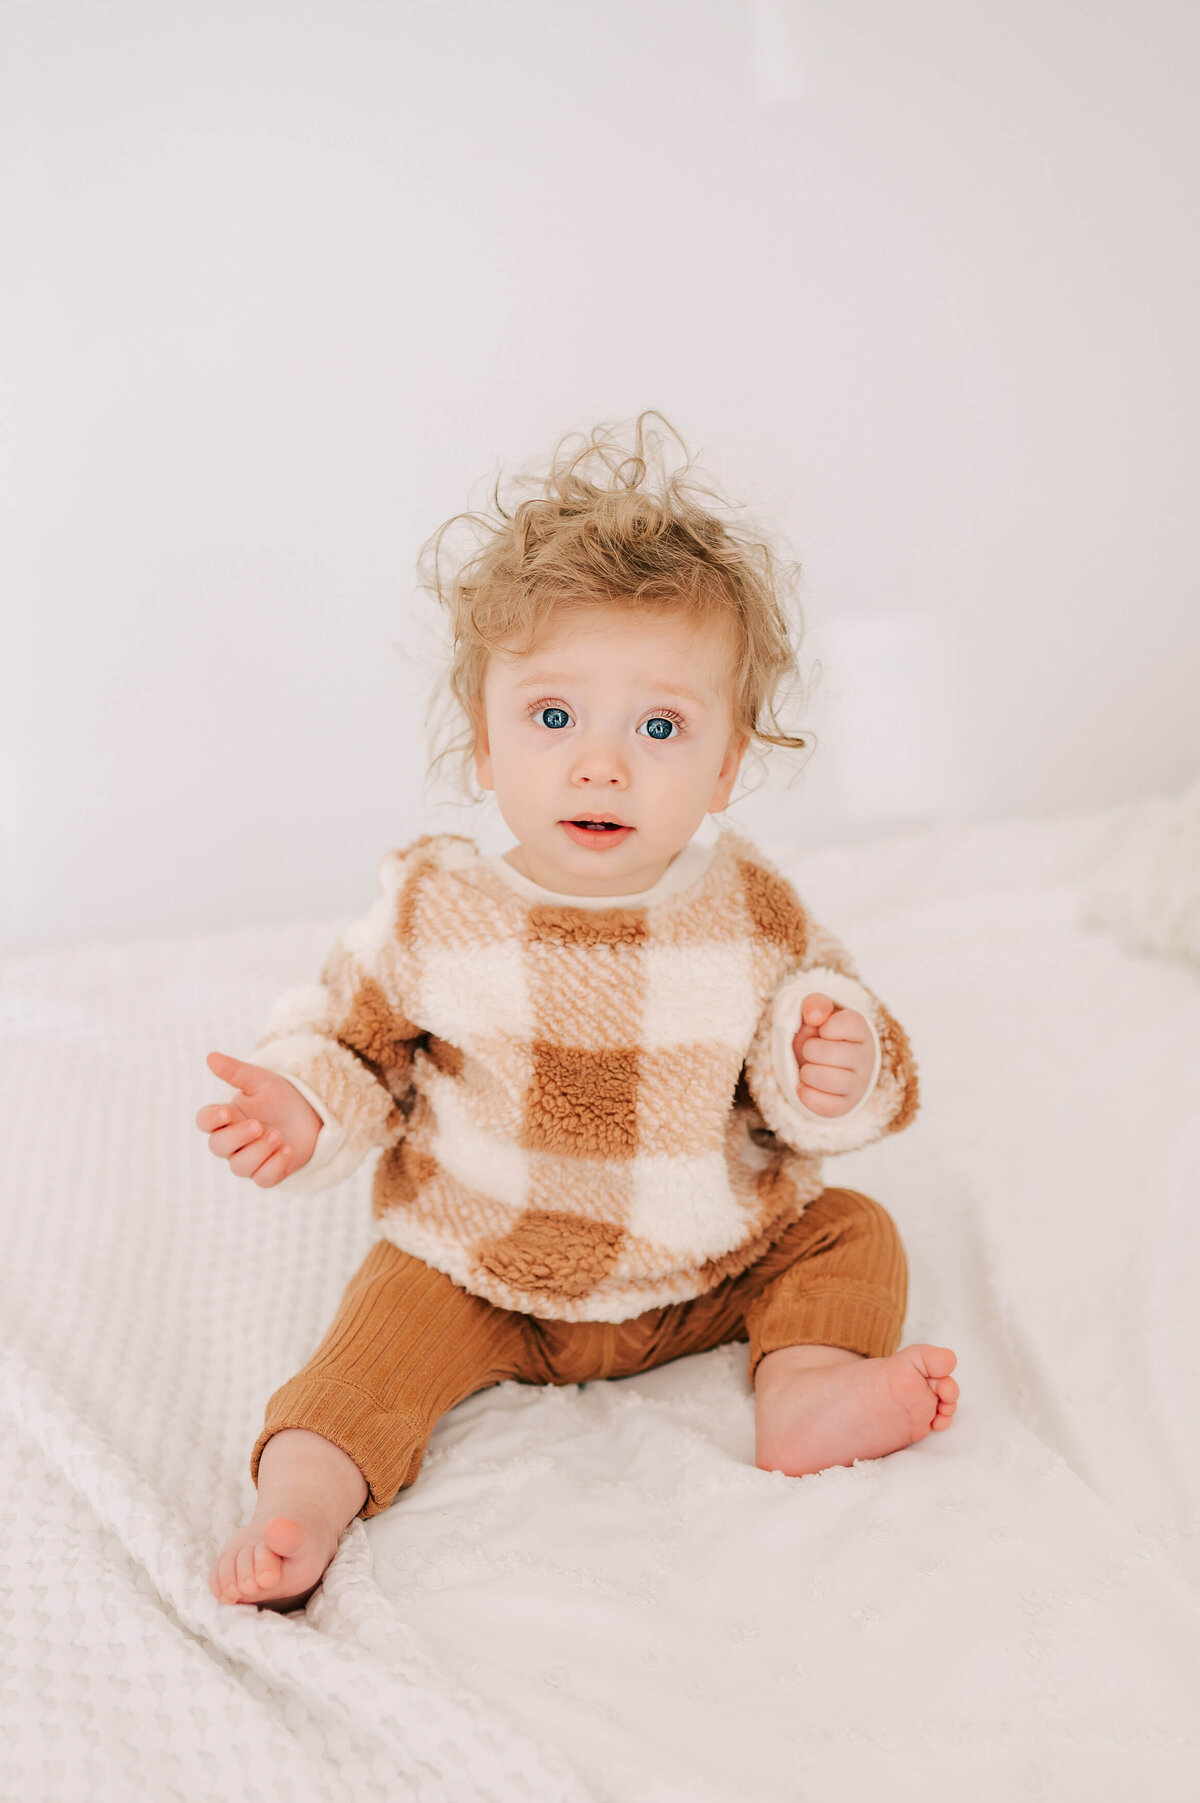 Springfield MO baby photographer Jessica Kennedy of The XO Photography captures baby boy in brown sweater